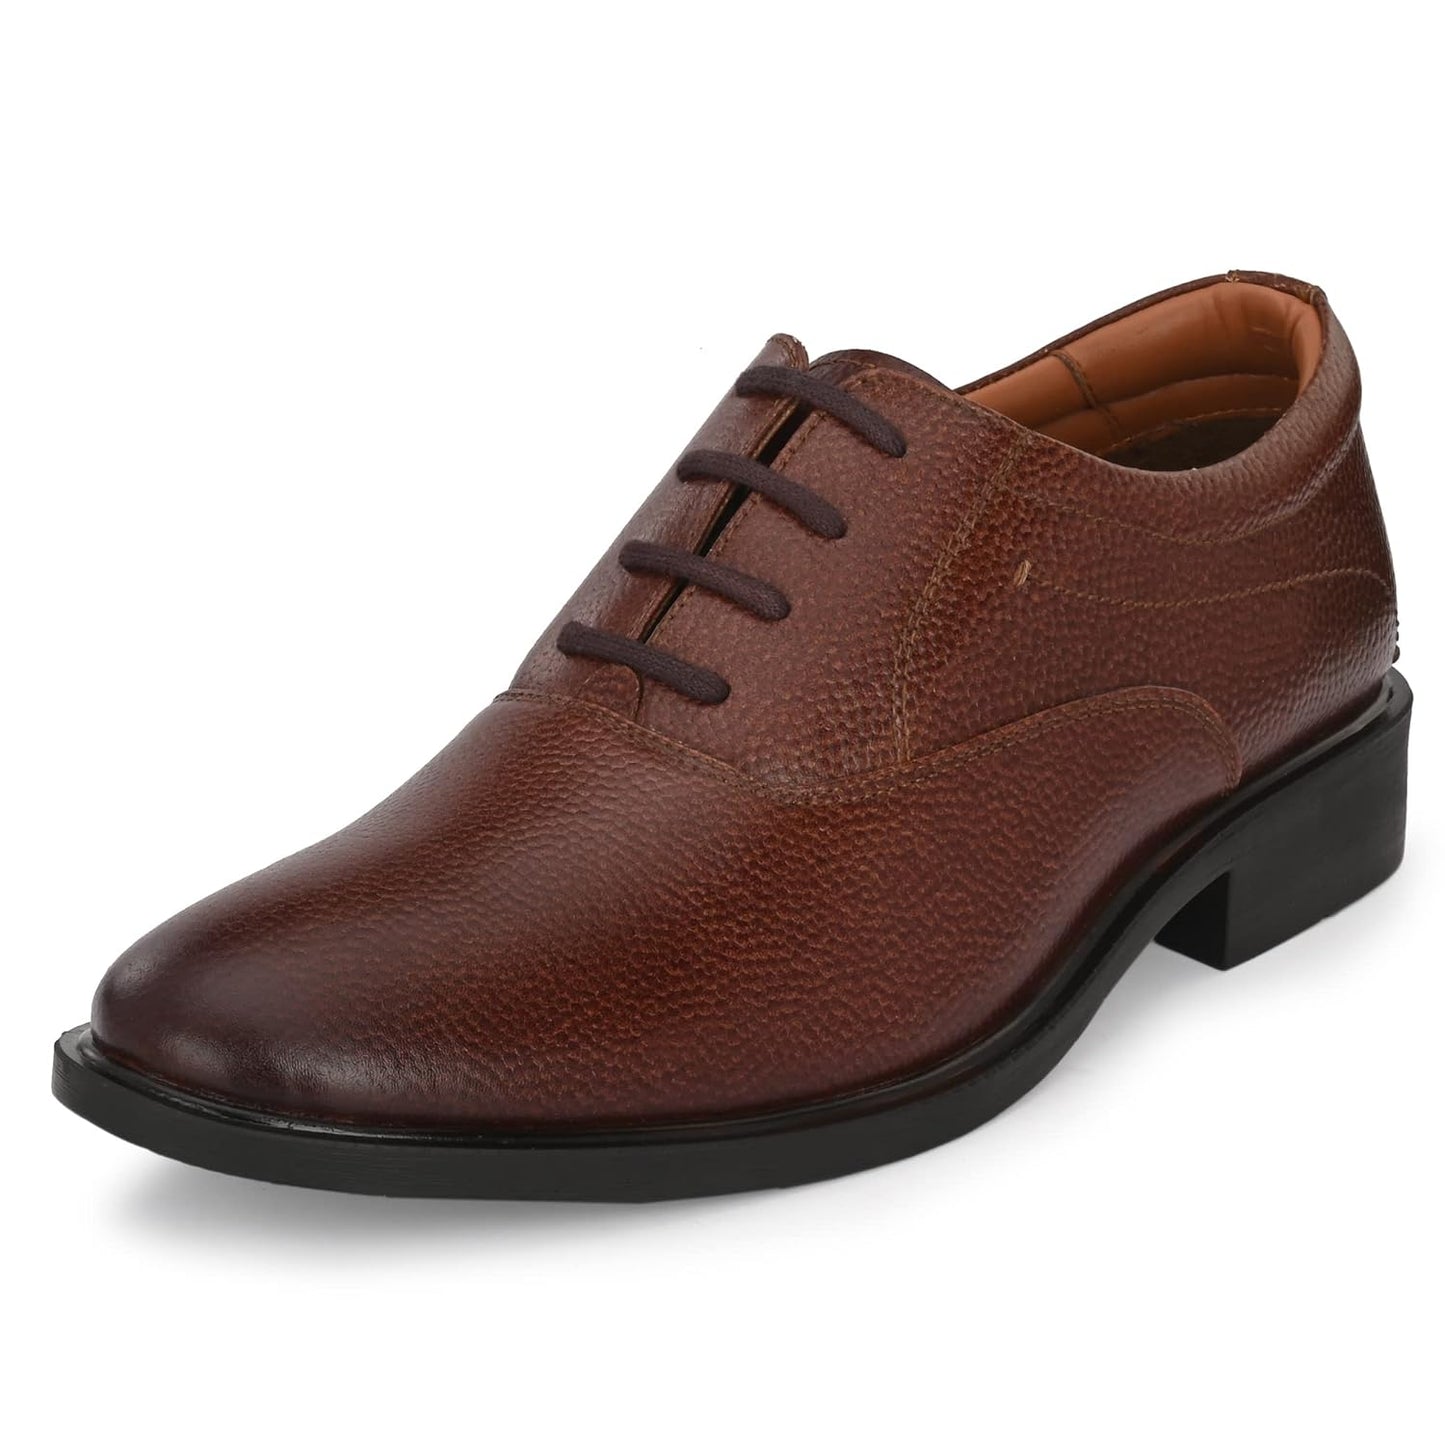 Auserio Men's Oxford Full Grain Leather Derby Lace Up Formal Shoes | Anti Skid Sole & Waxed Laces | Memory Foam Padded Insole | Shoes for Office & Parties | Tan 9 UK (SSE 039) 